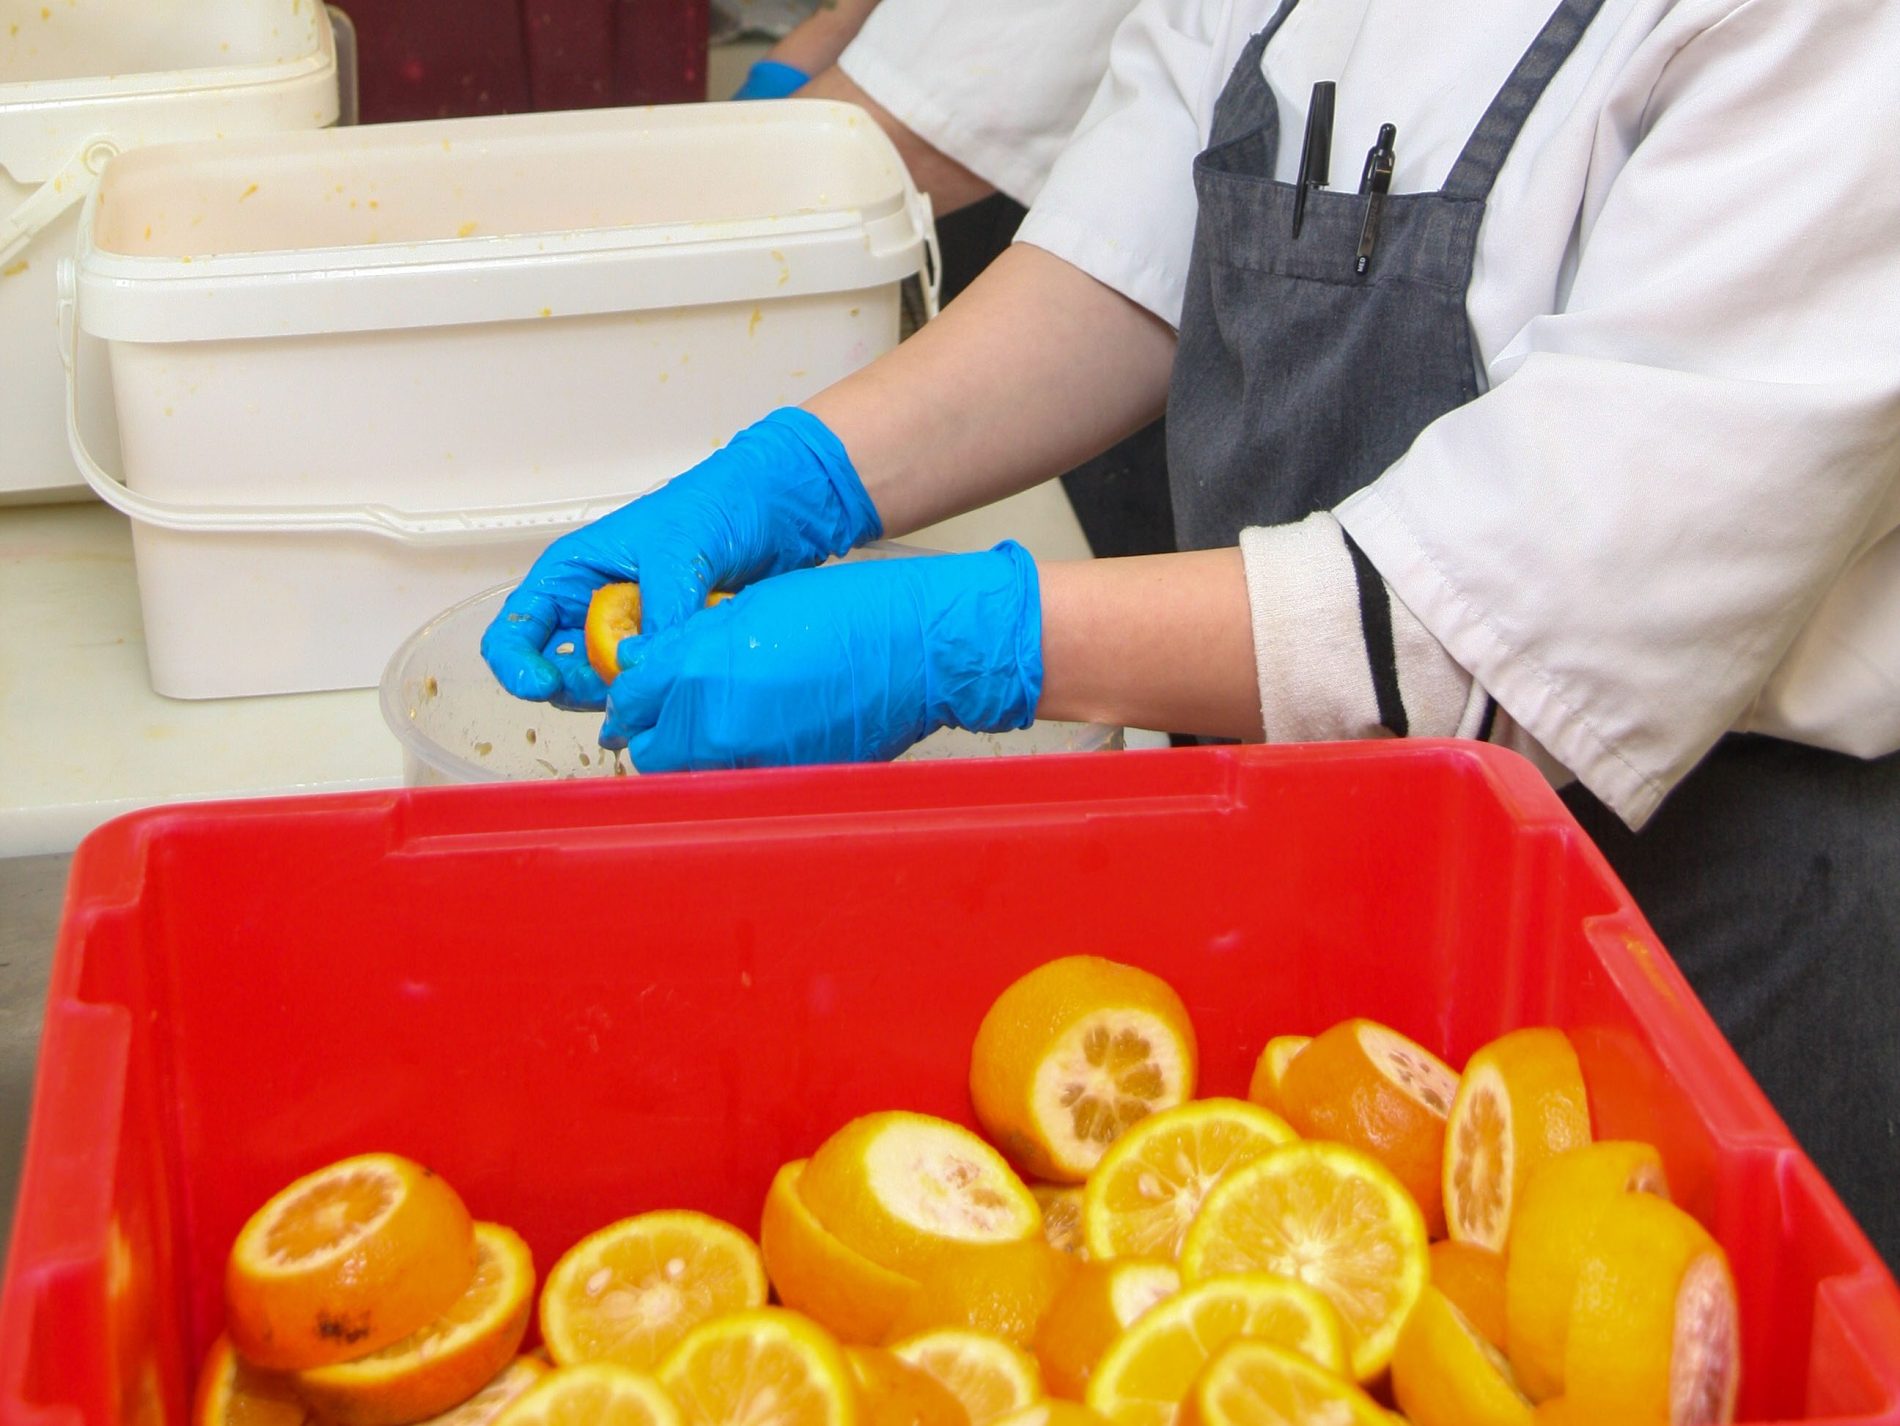 Juicing oranges by hand for marmalade at McNeill's Fine Foods